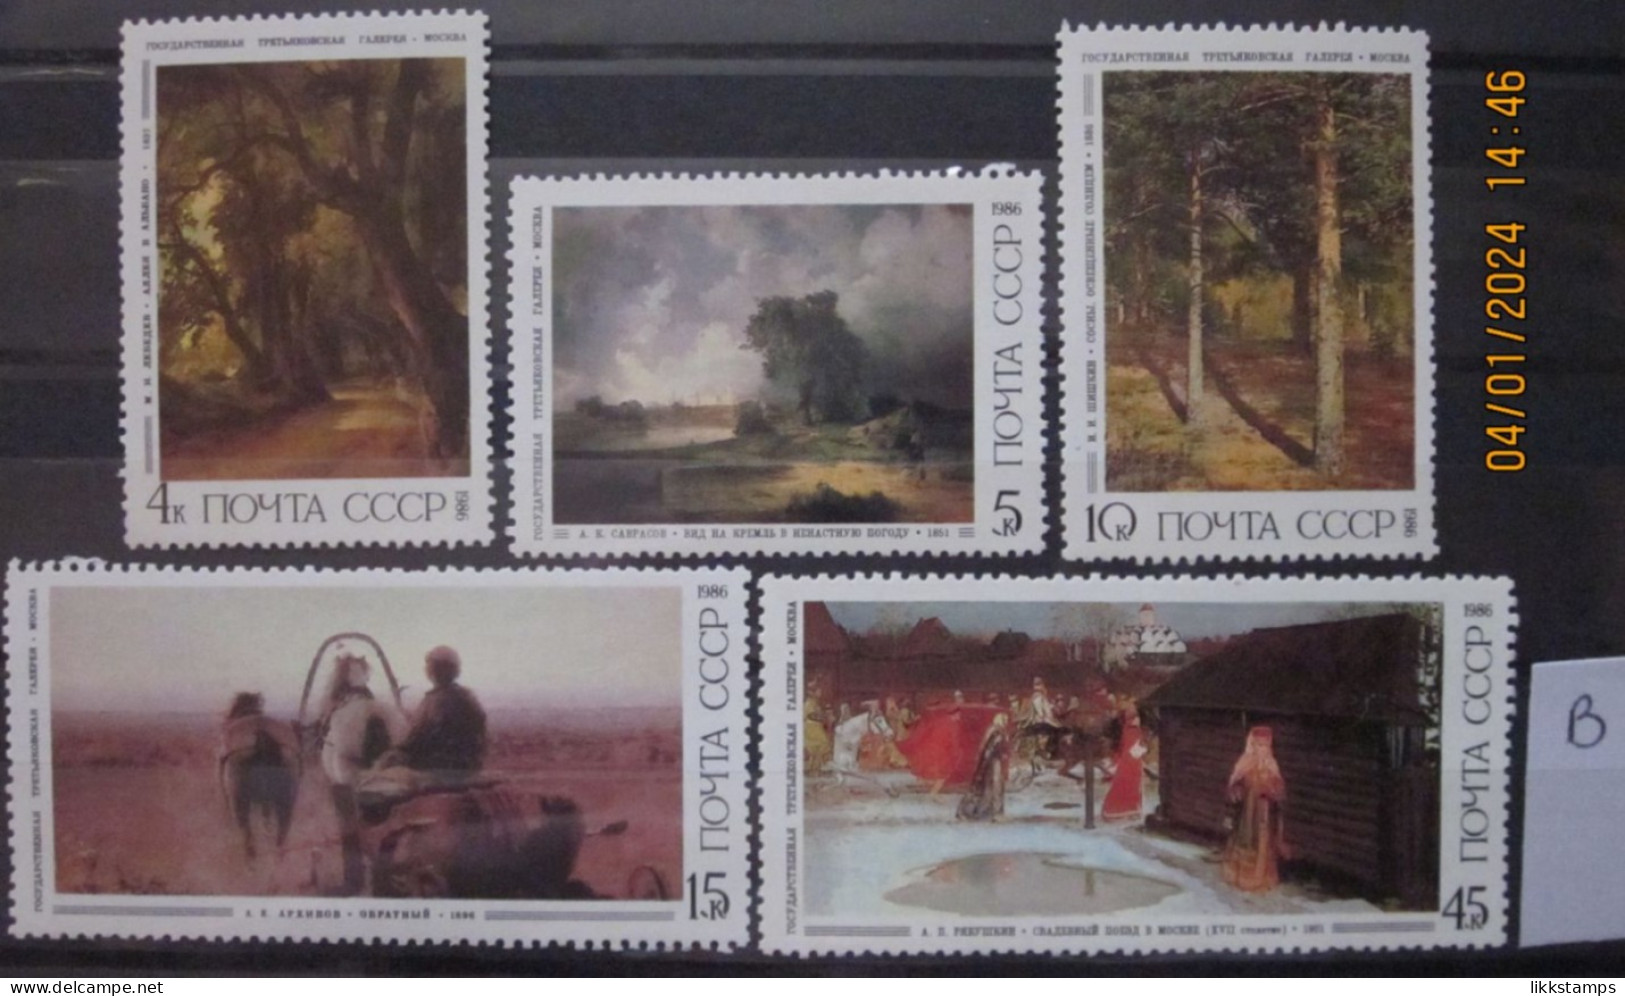 RUSSIA ~ 1986 ~ S.G. NUMBERS 5663 - 5667, ~ 'LOT B' ~ RUSSIAN PAINTINGS. ~ MNH #03647 - Ungebraucht